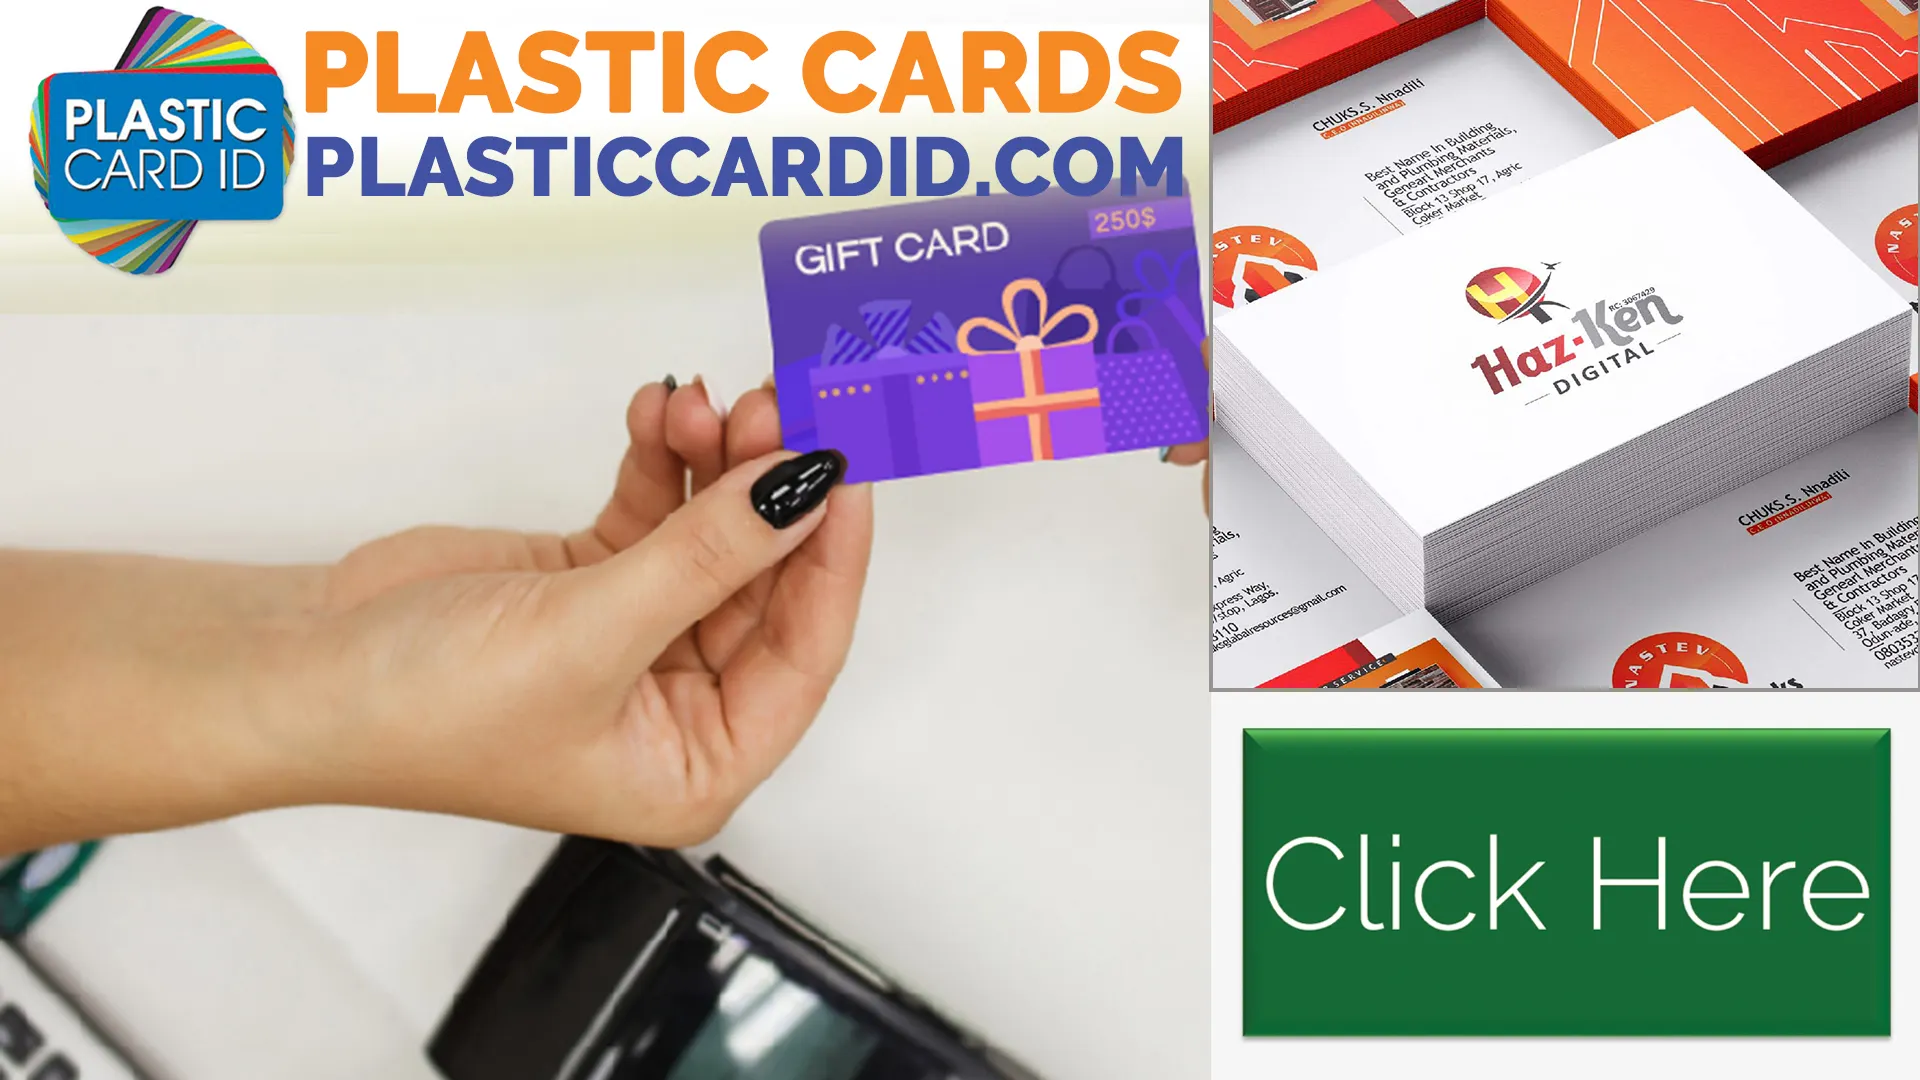 Experience Unmatched Security with Our Smart Chip-Integrated Plastic Cards